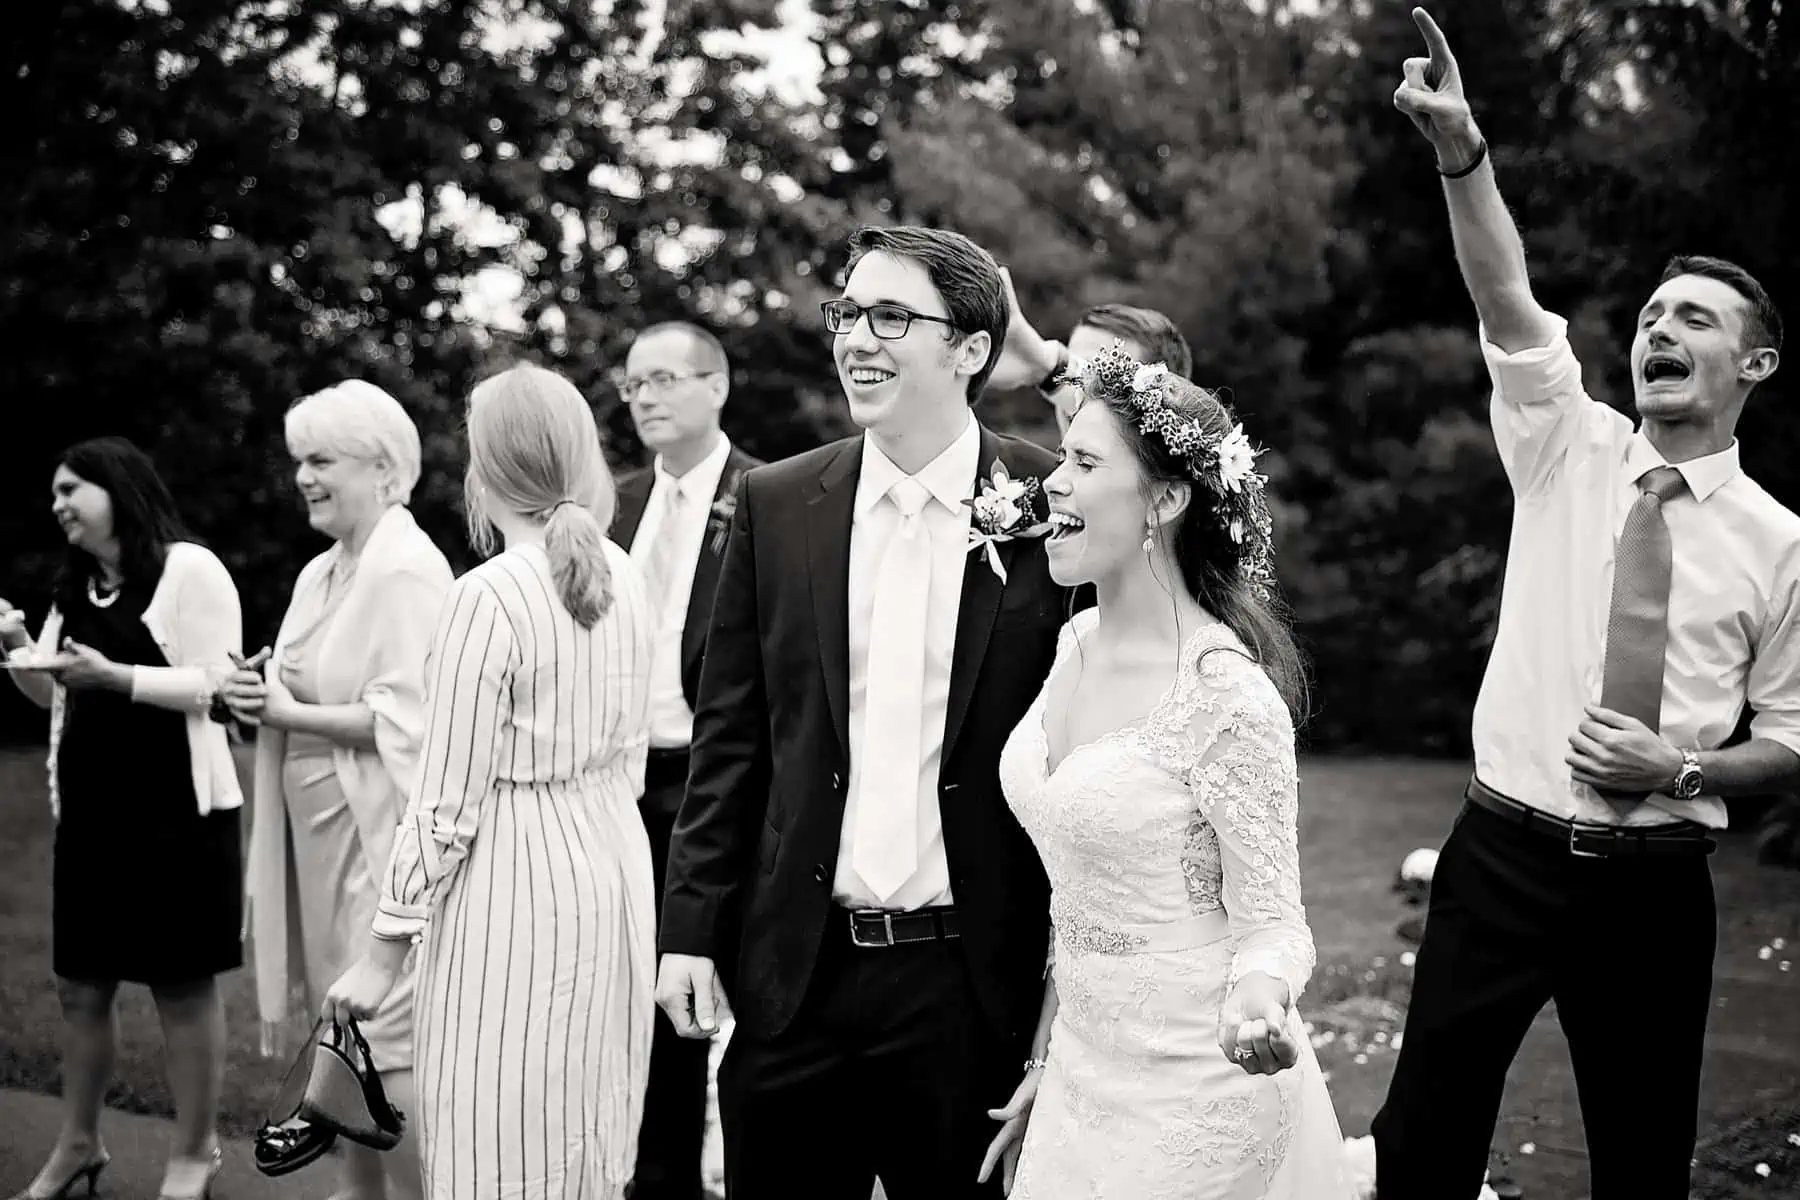 A black and white photo of a bride and groom celebrating their wedding.